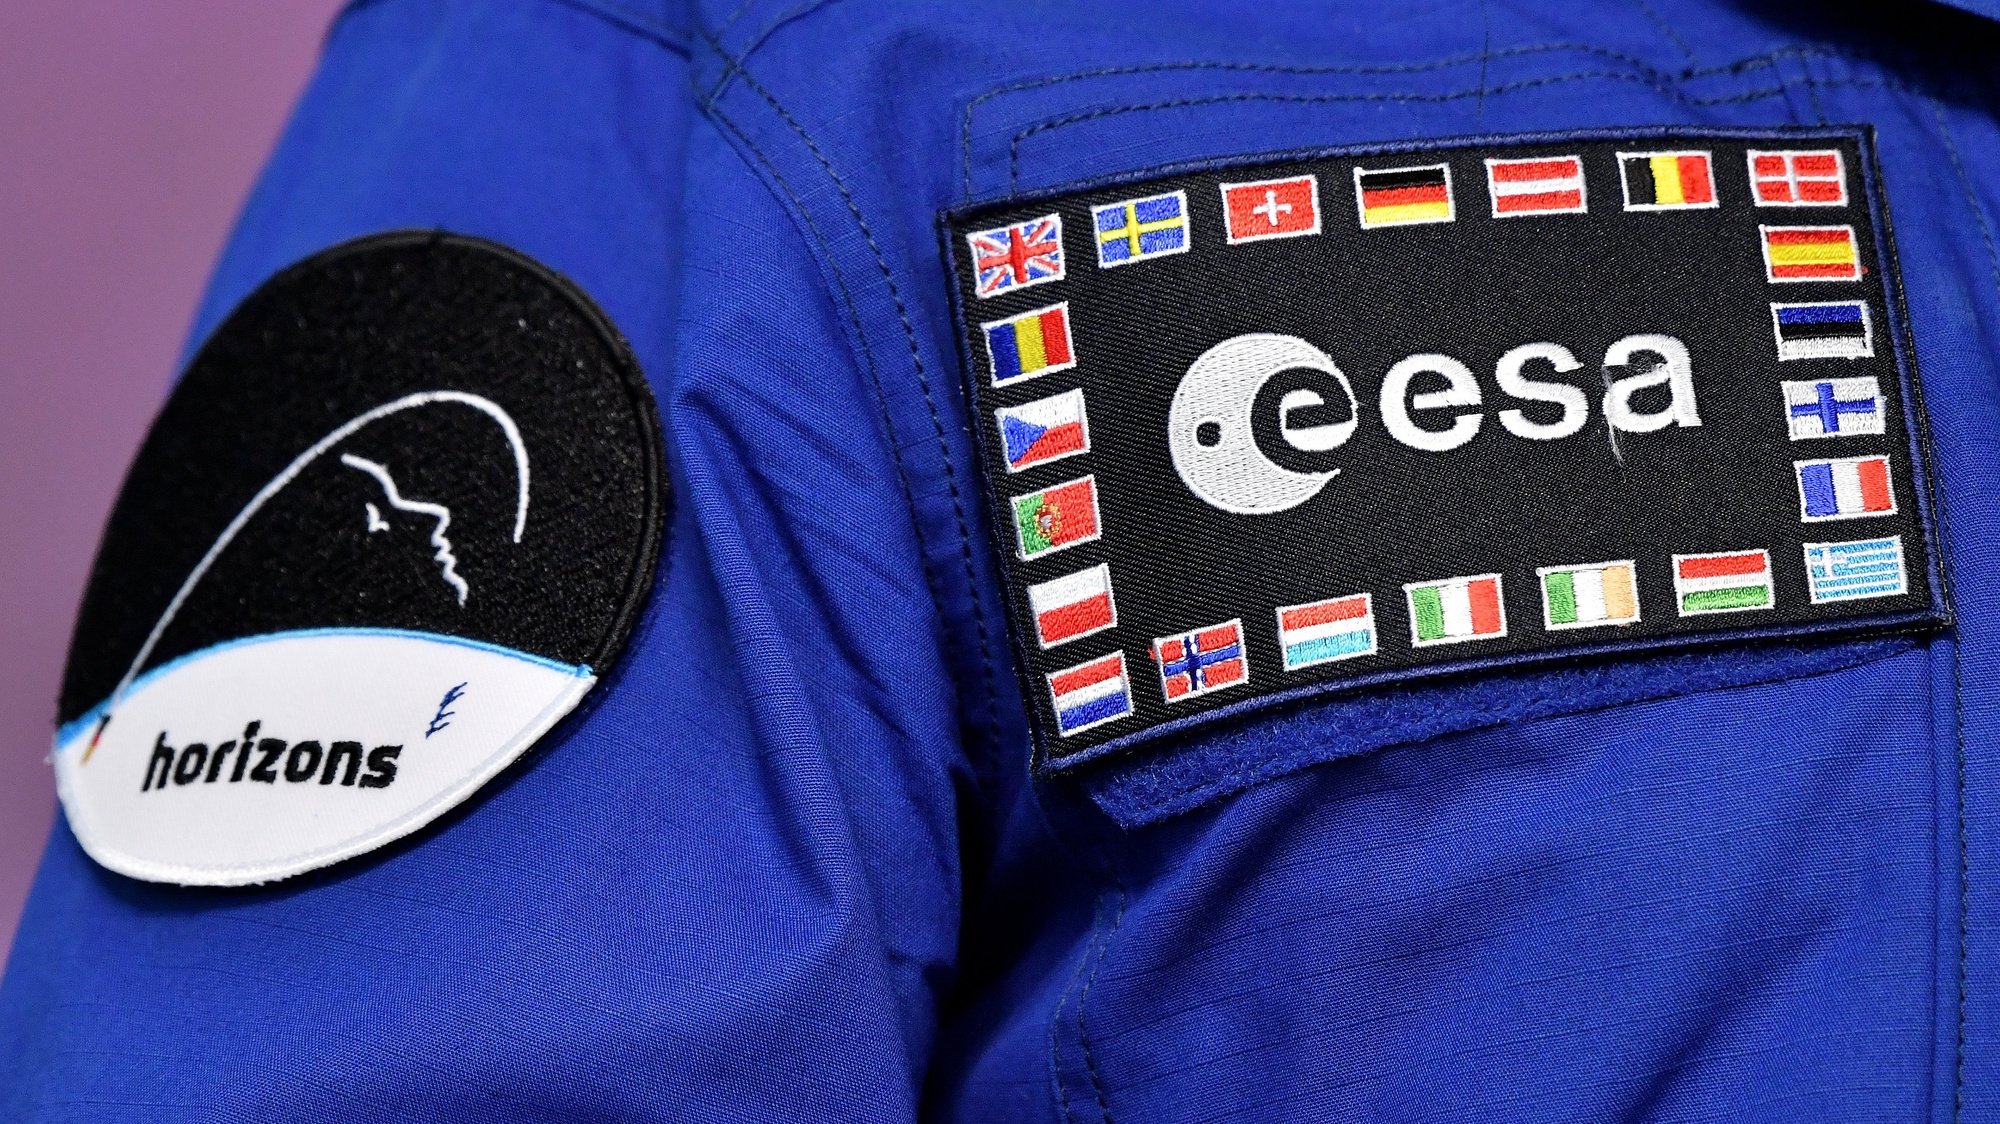 epa06674386 Detail of German ESA astronaut Alexander Gerst&#039;s outfit as he attends a press conference at the European Space Agency (ESA) / European Astronaut Centre (EAC) in Cologne, Germany, 17 April 2018. Along with US NASA astronaut Serena Aunon-Chancellor and Russian cosmonaut Sergey Prokopyev, Gerst will depart in a Soyuz MS-09 from the Baikonur Cosmodrome in Kazakhstan on 06 June 2018, for his second long-term stay on the International Space Station (ISS).  EPA/SASCHA STEINBACH